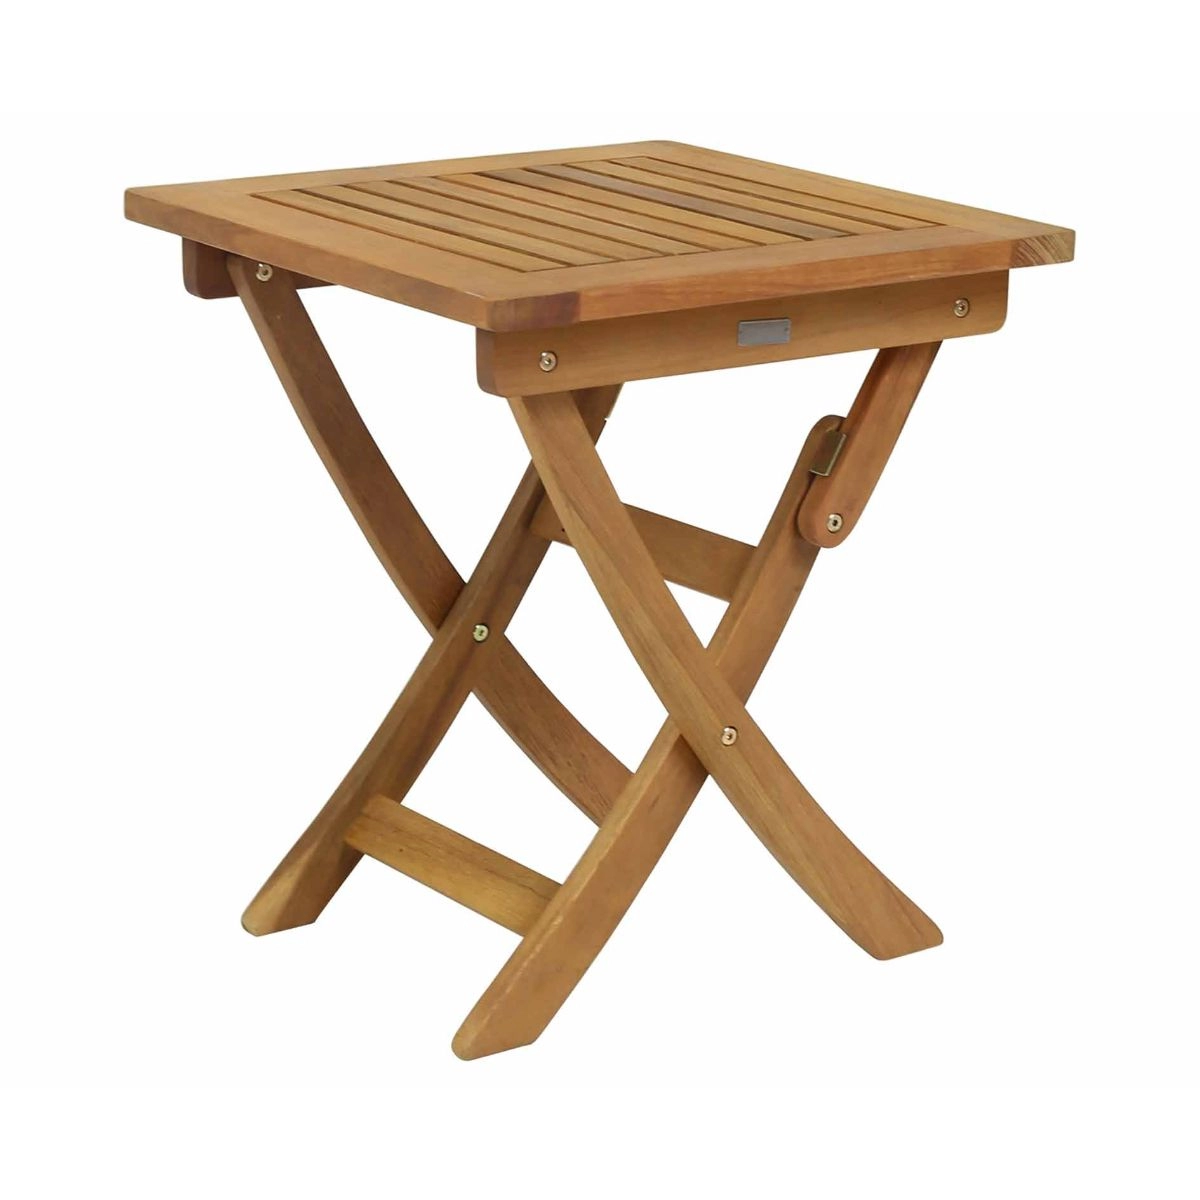 Charles Bentley Fsc Small Wooden Square Foldable Patio Table